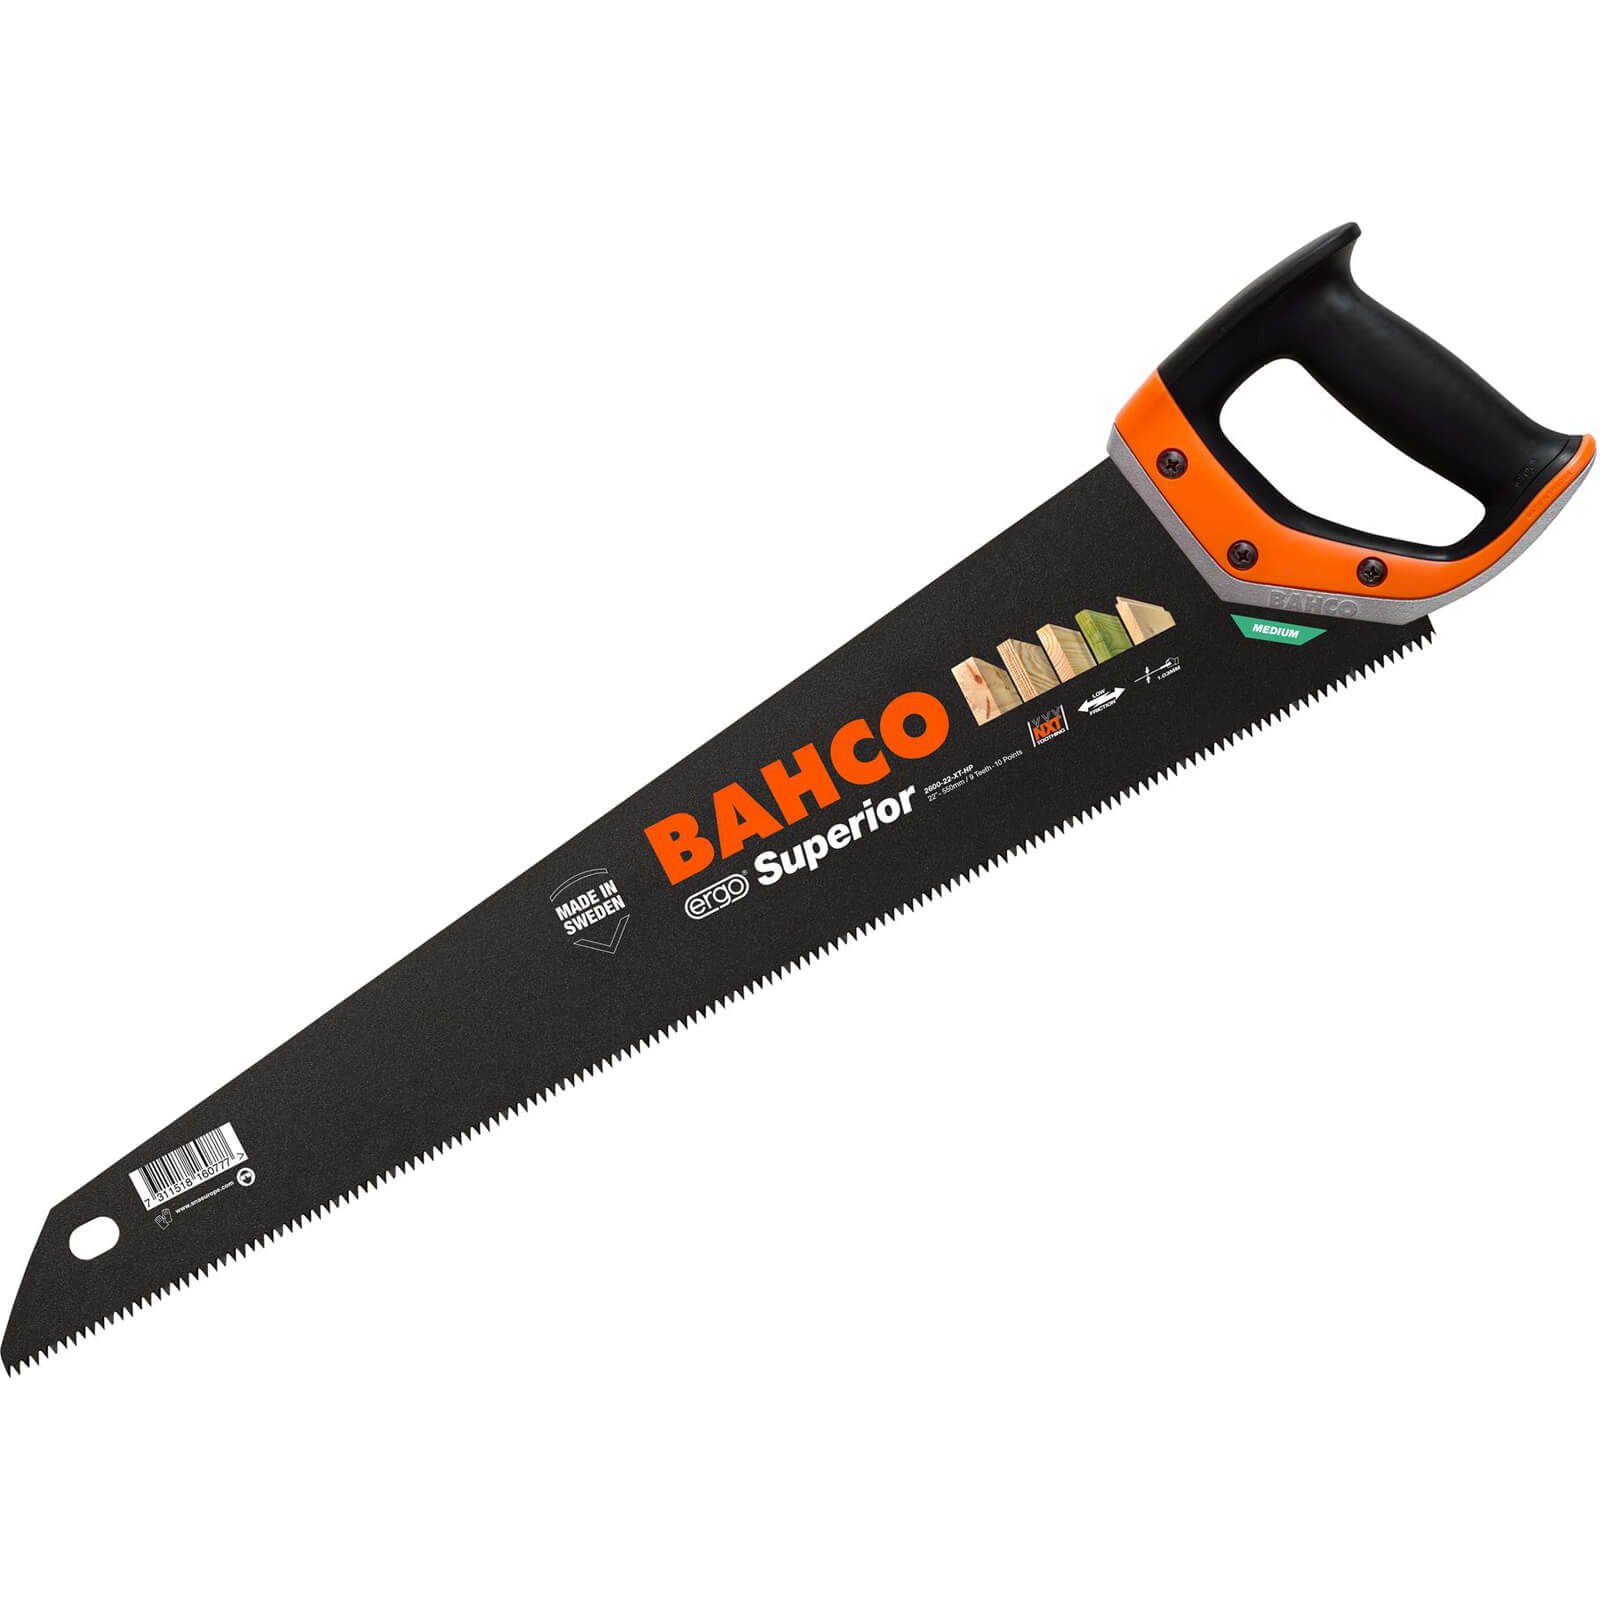 Image of Bahco 2600XT Superior Hand Saw 22" / 550mm 9tpi